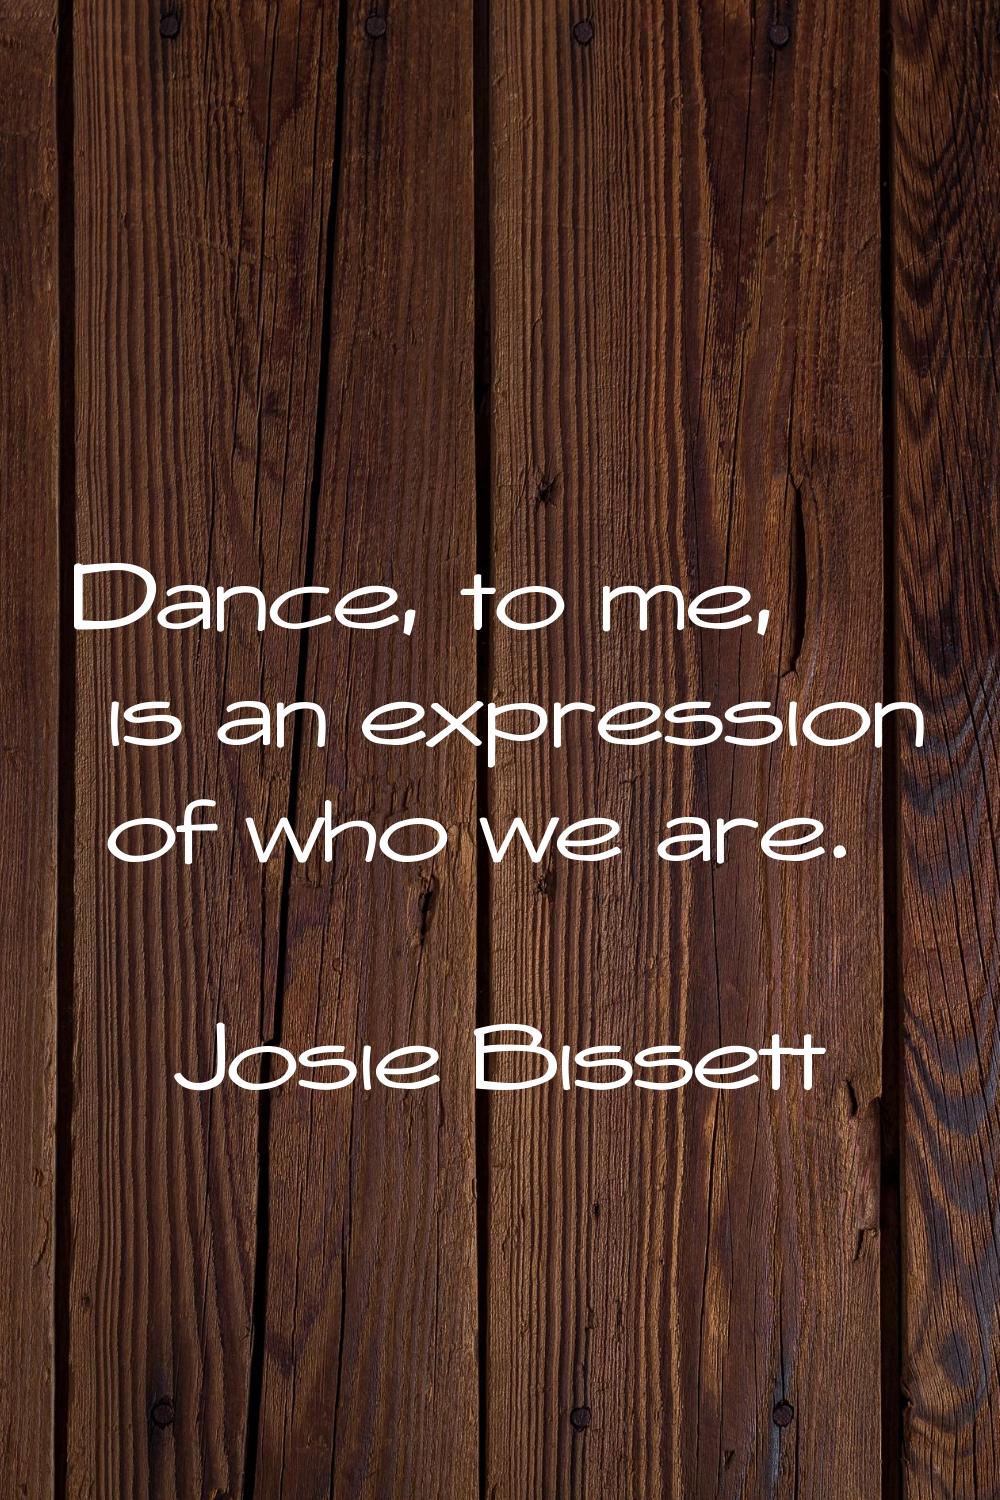 Dance, to me, is an expression of who we are.